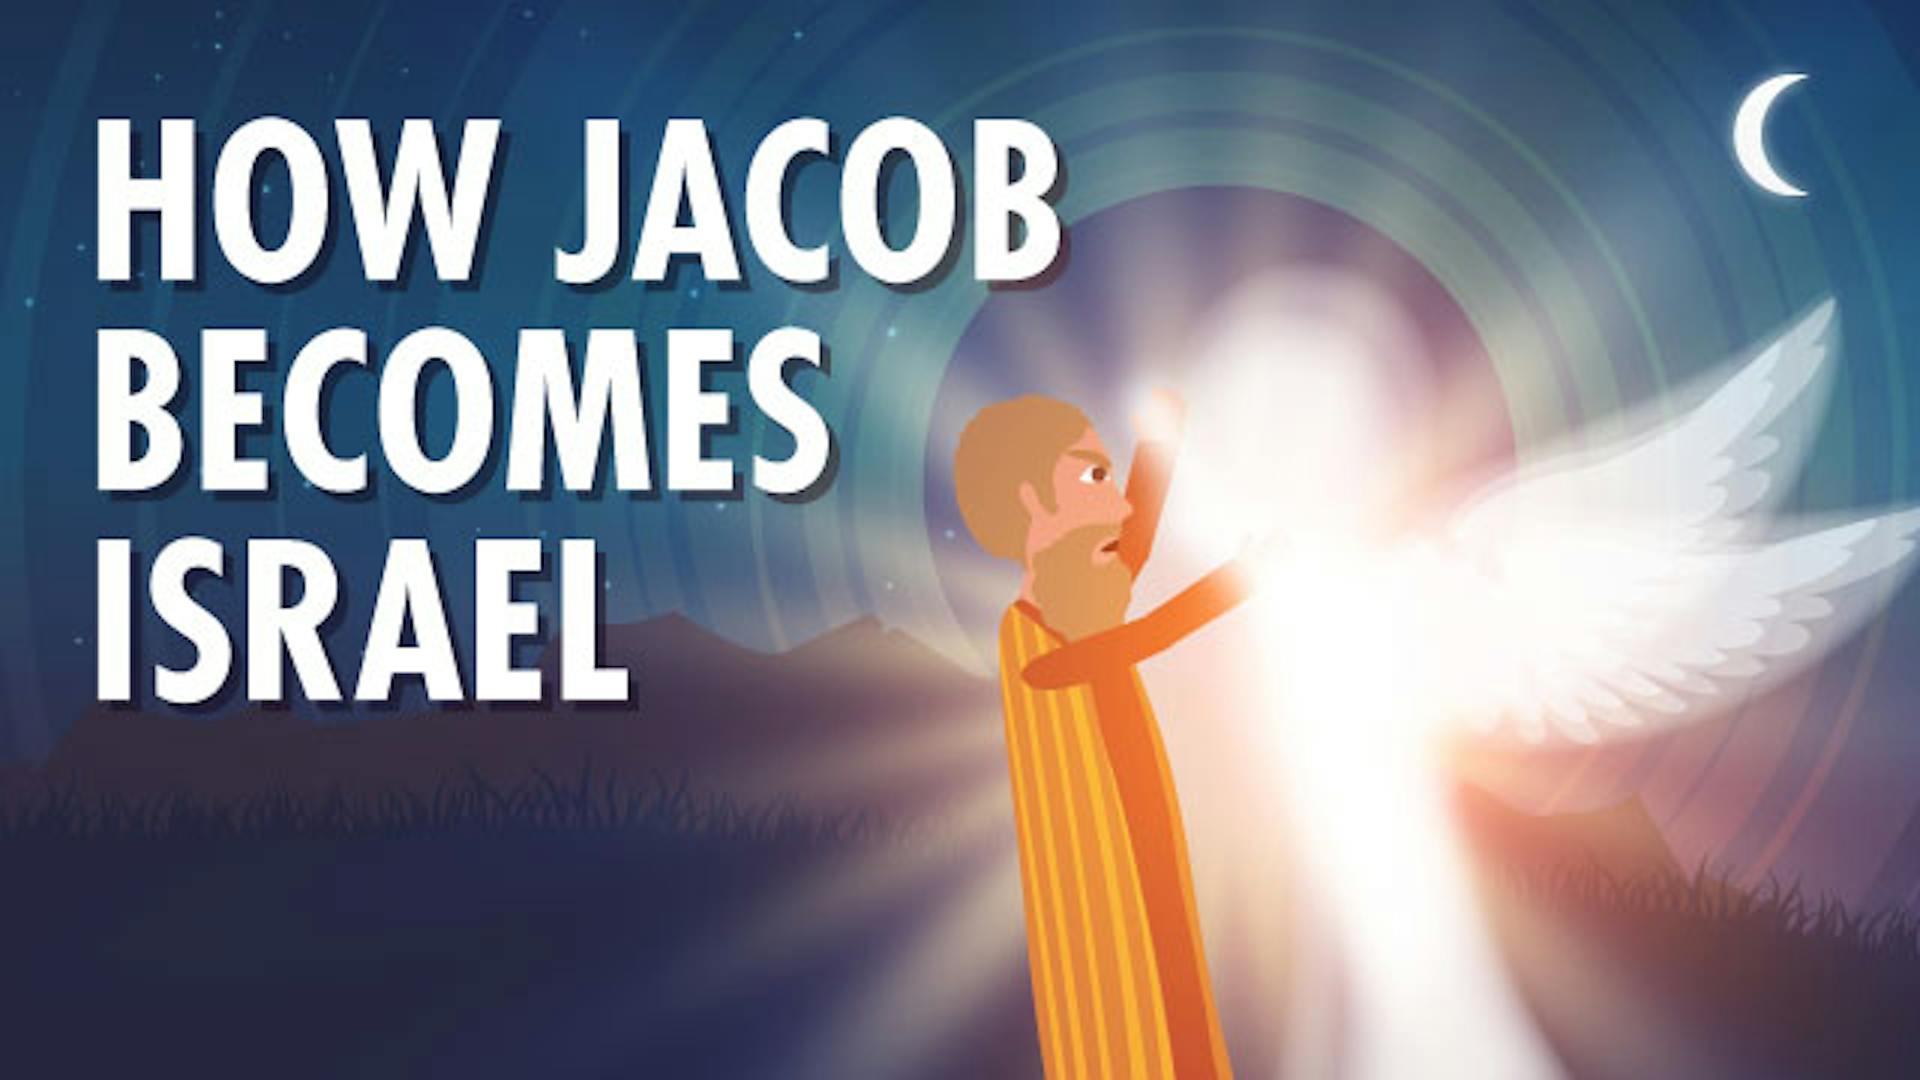 the-meaning-behind-jacob-s-name-change-to-israel-aleph-beta